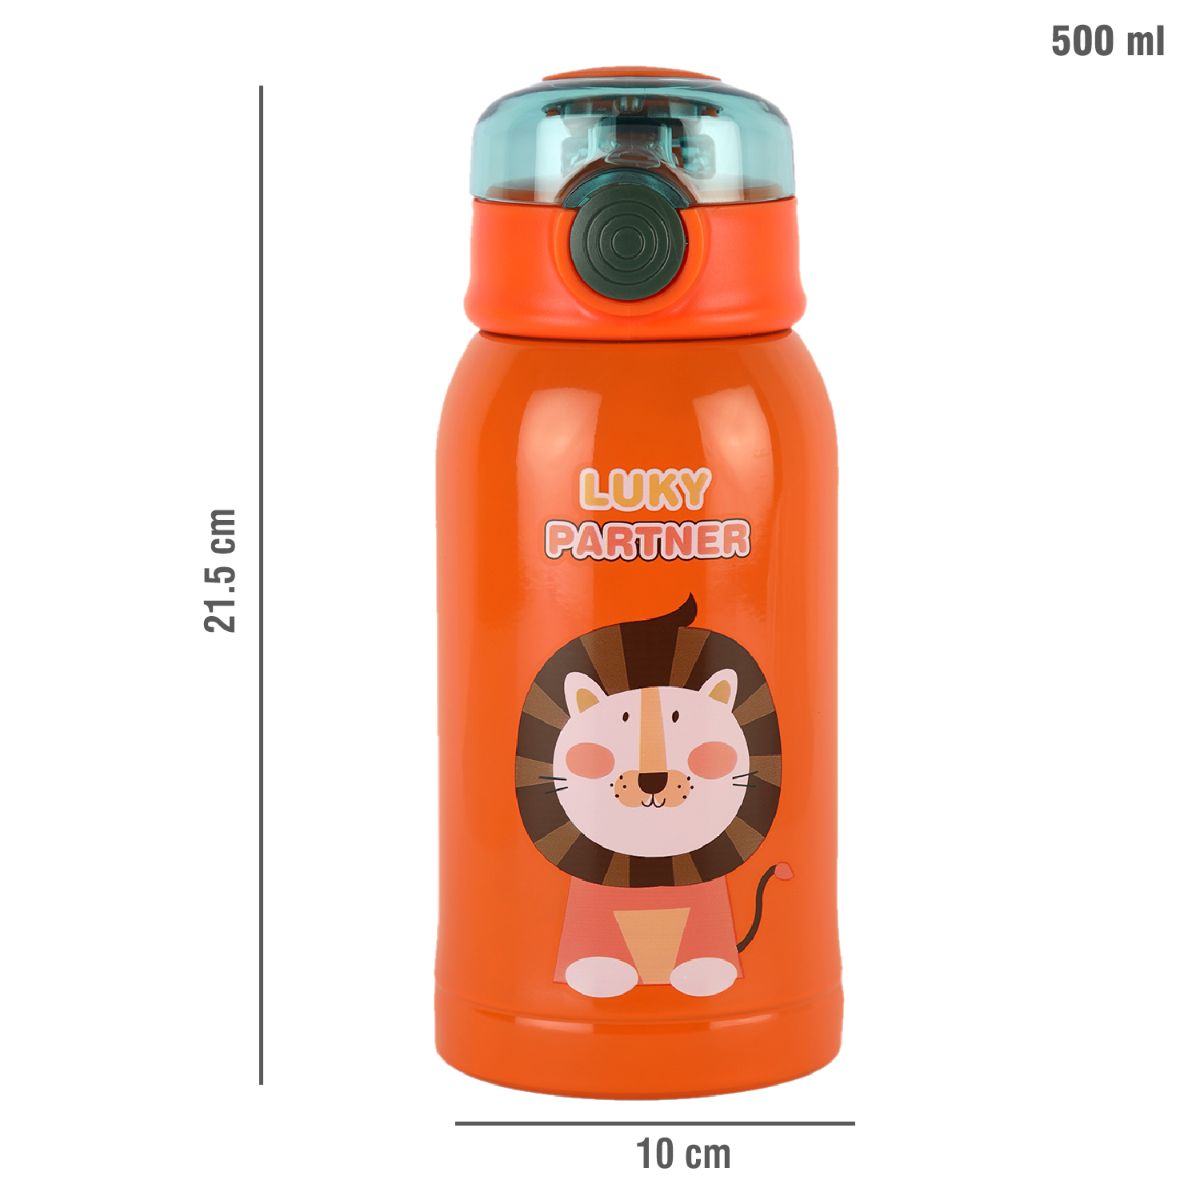 Kinder Hot & Cold Stainless Steel Kids Water Bottle, 500ml / 500ml